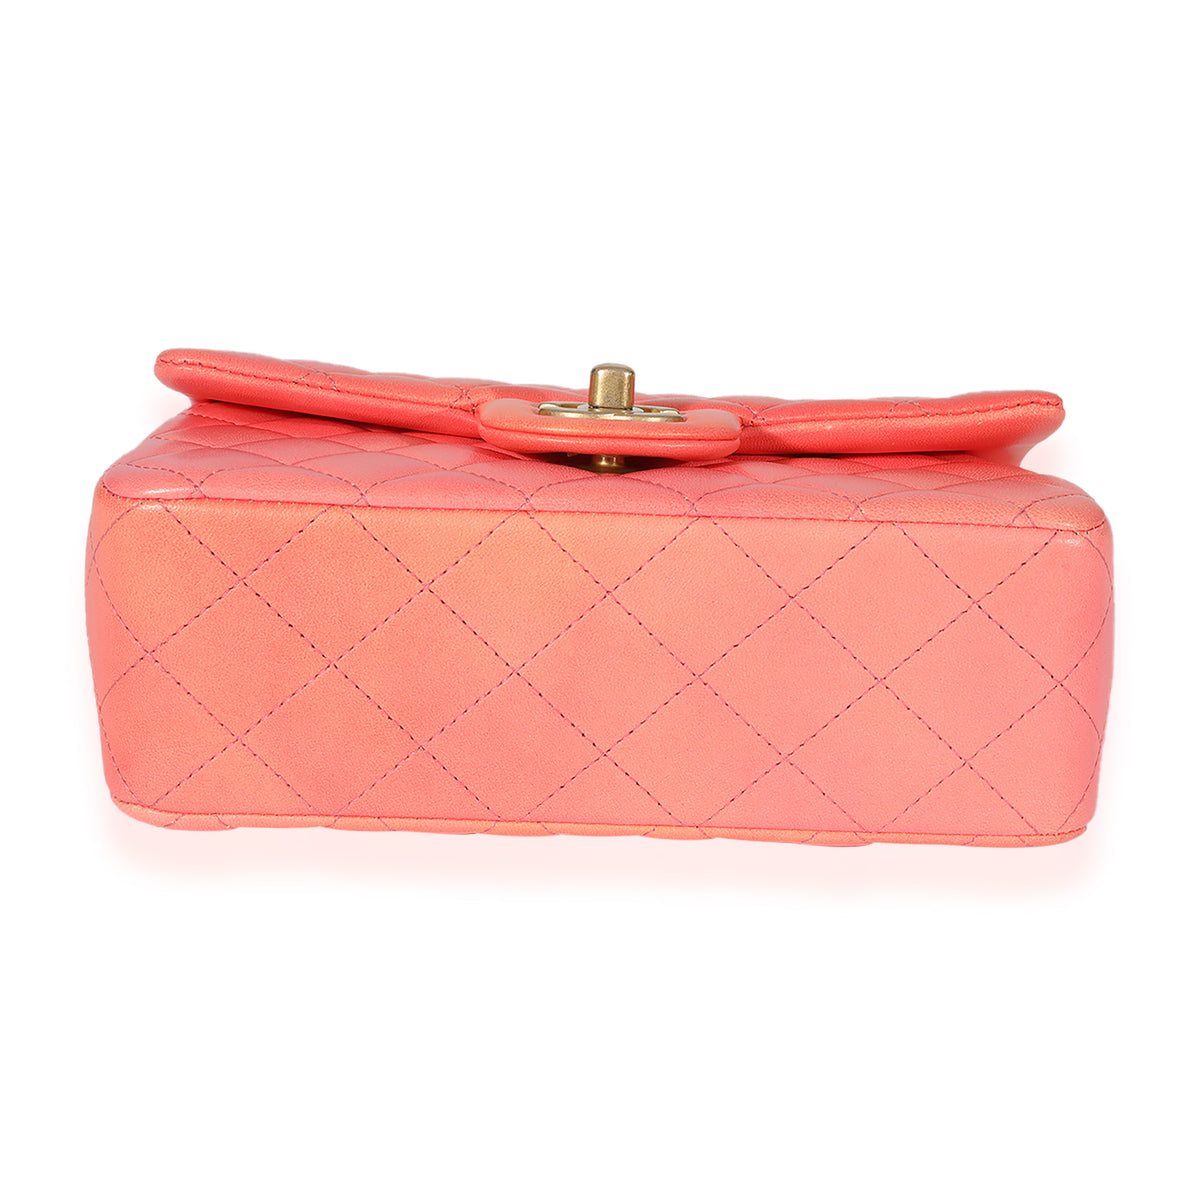 Chanel Mini Square Flap with Top Handle Light Orange and Ecru